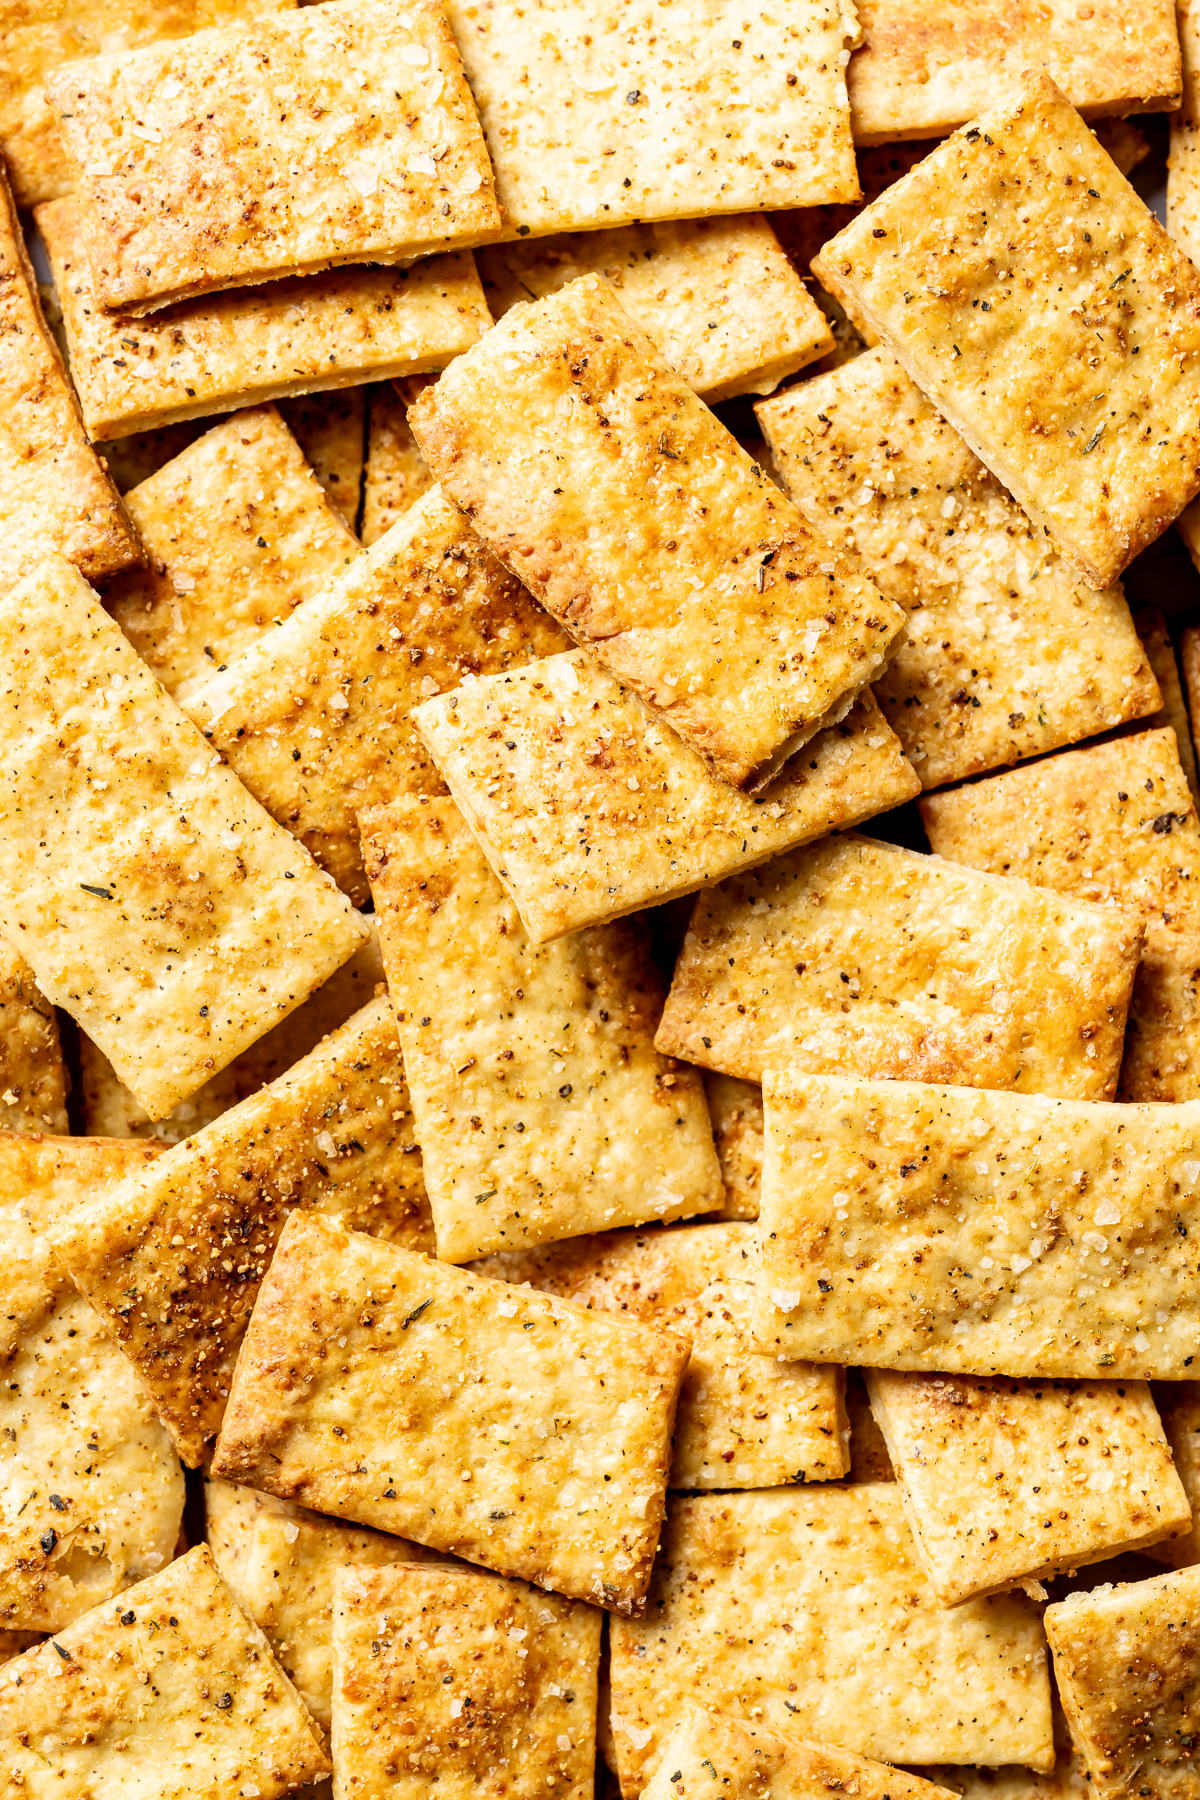 A pile of golden baked cheese crackers with lemon pepper seasoning